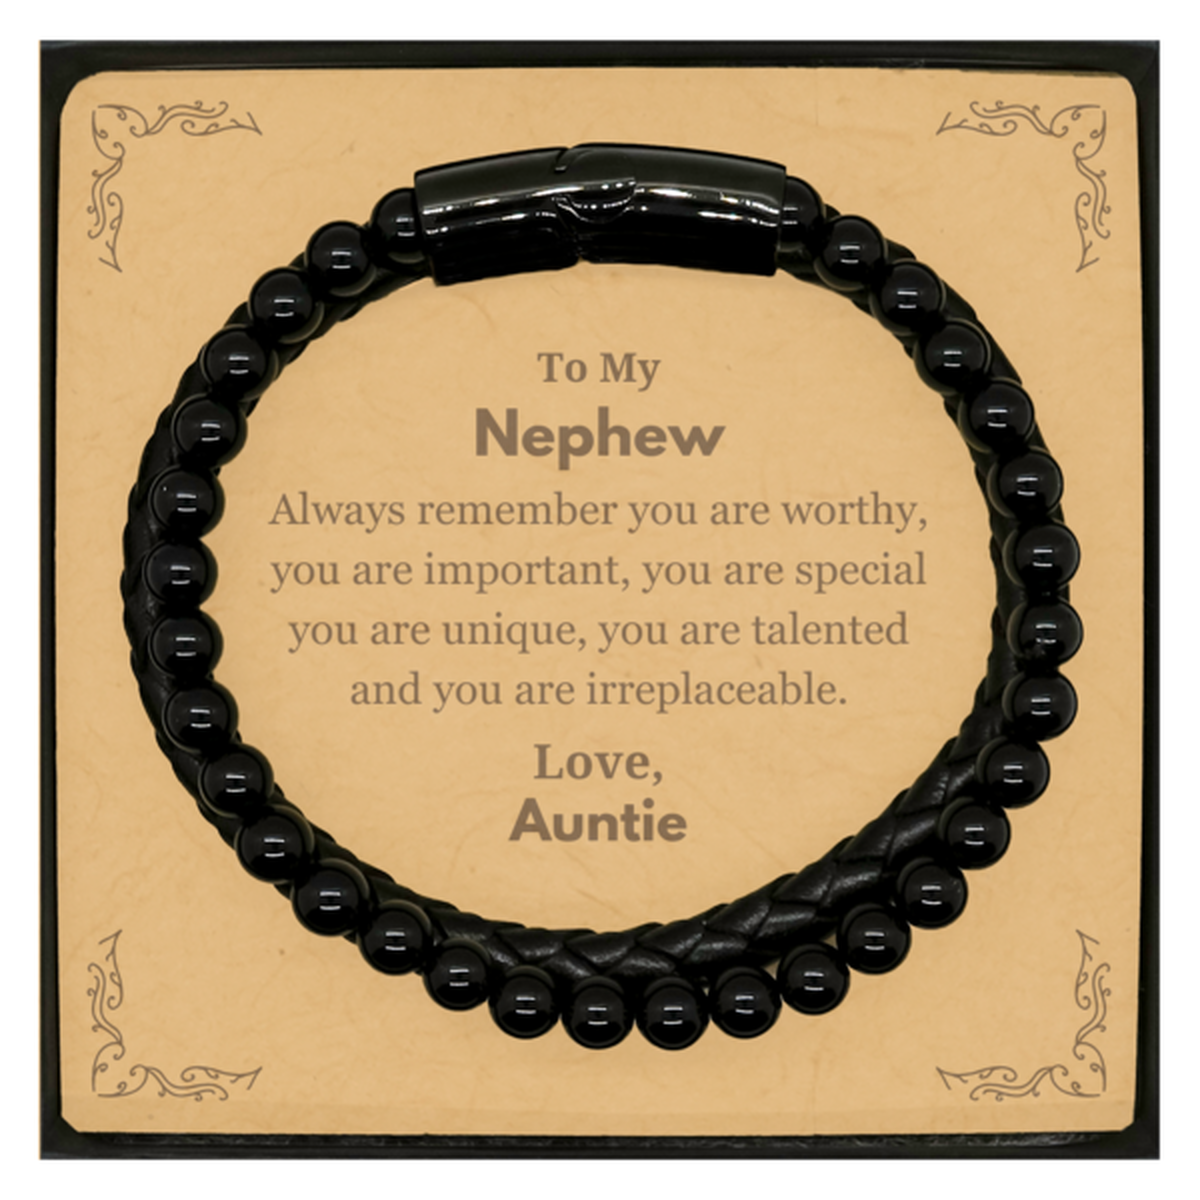 Nephew Birthday Gifts from Auntie, Inspirational Stone Leather Bracelets for Nephew Christmas Graduation Gifts for Nephew Always remember you are worthy, you are important. Love, Auntie